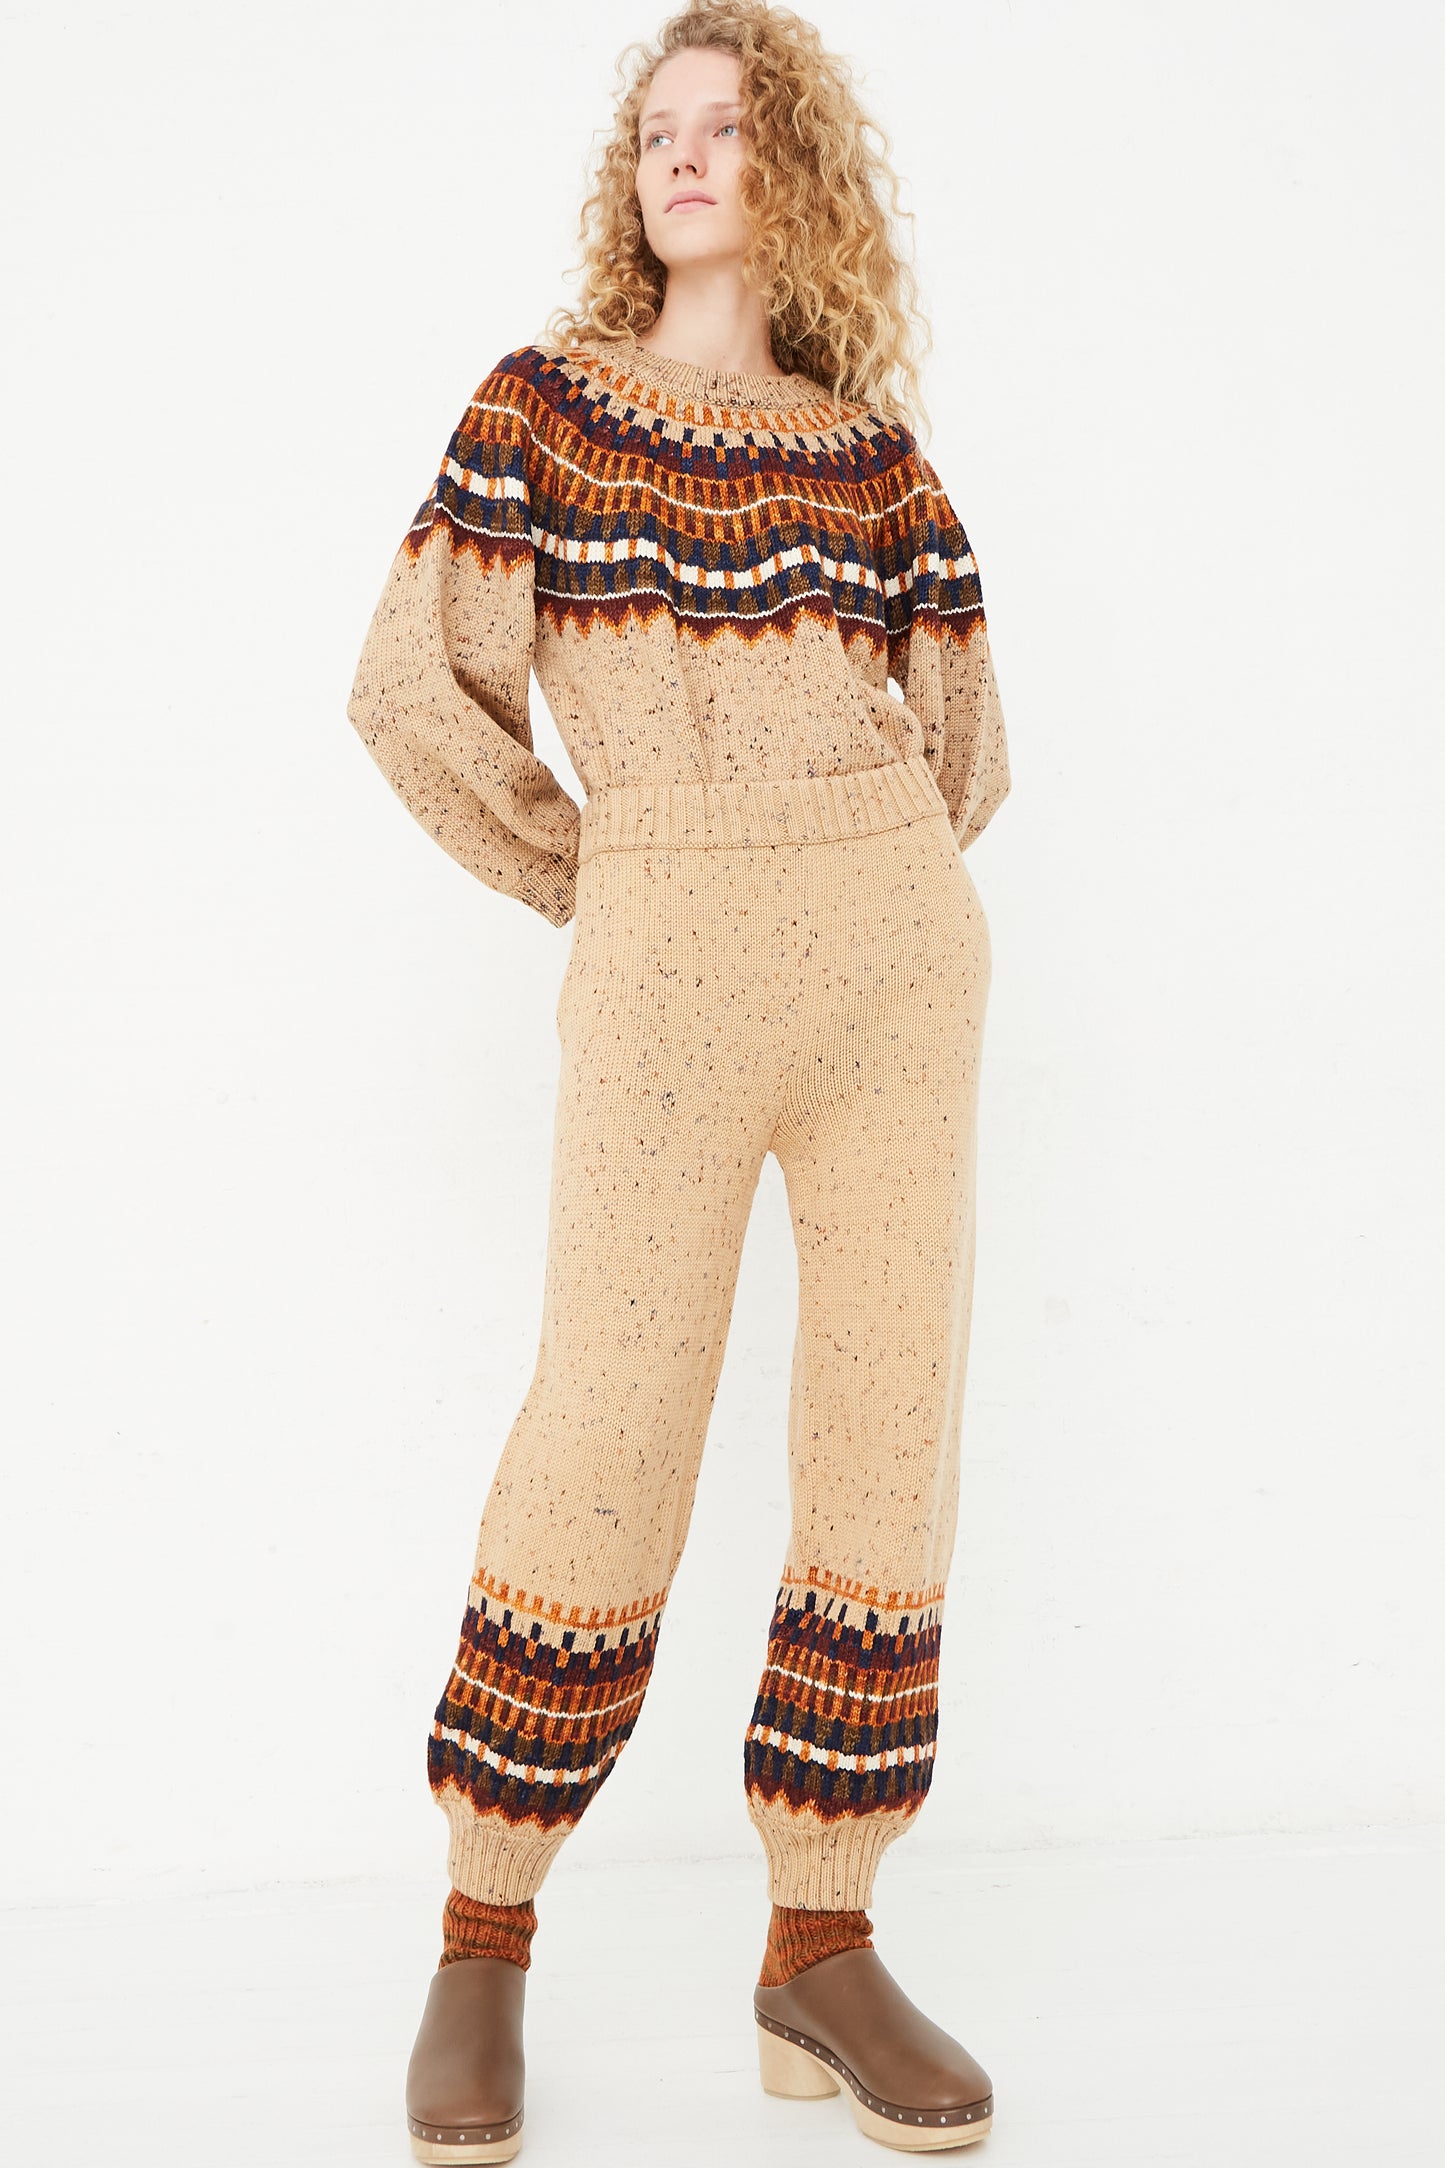 The model is wearing a beige Fair Isle Warm-Up Pant in Seed Confetti by Misha & Puff.